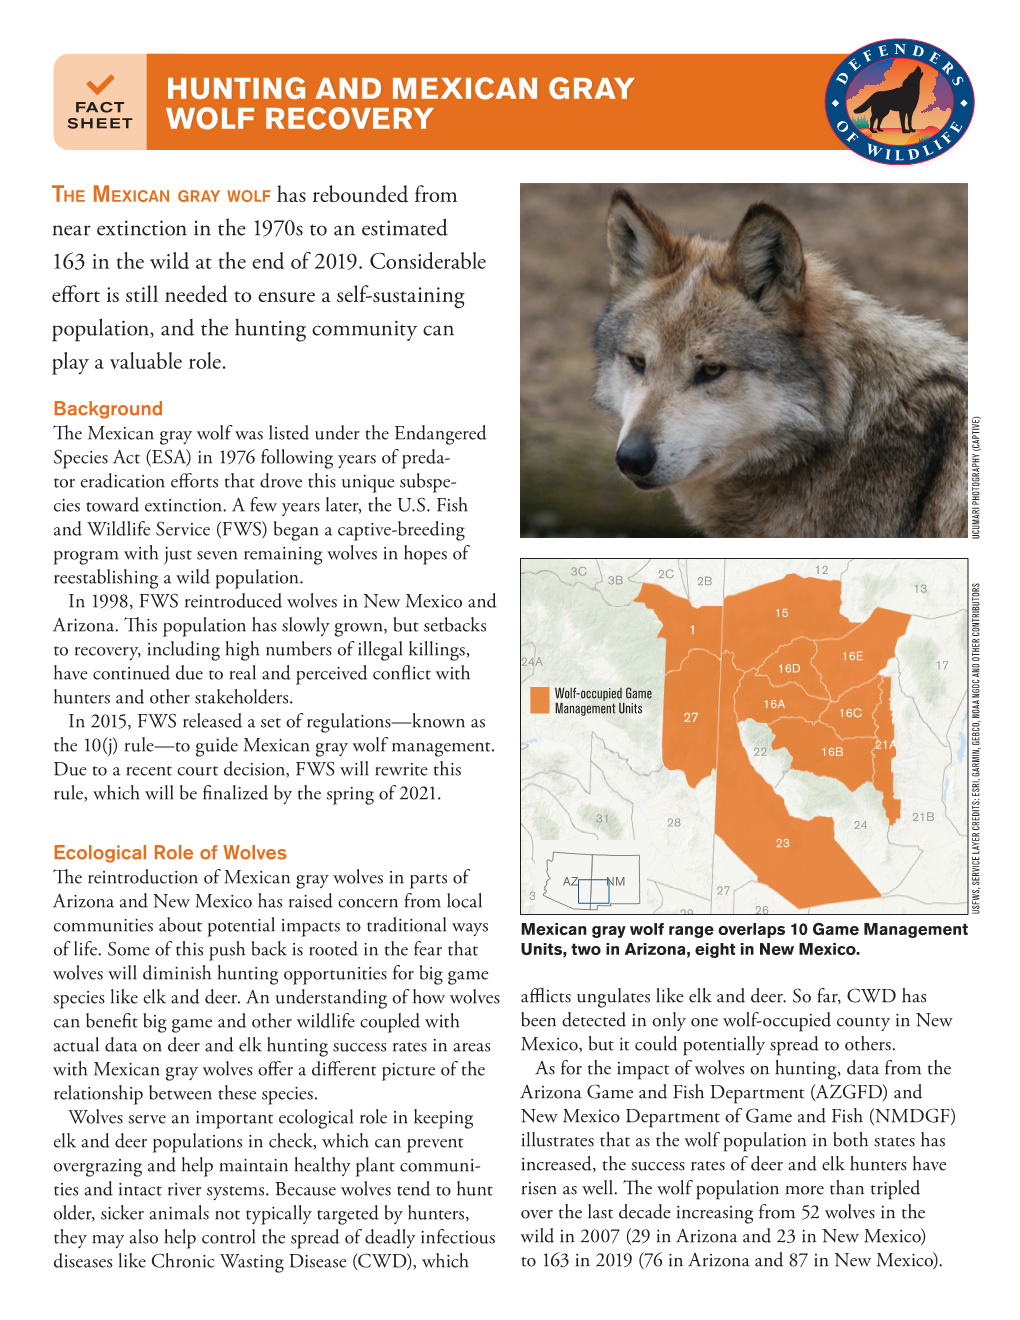 Hunting and Mexican Gray Wolf Recovery